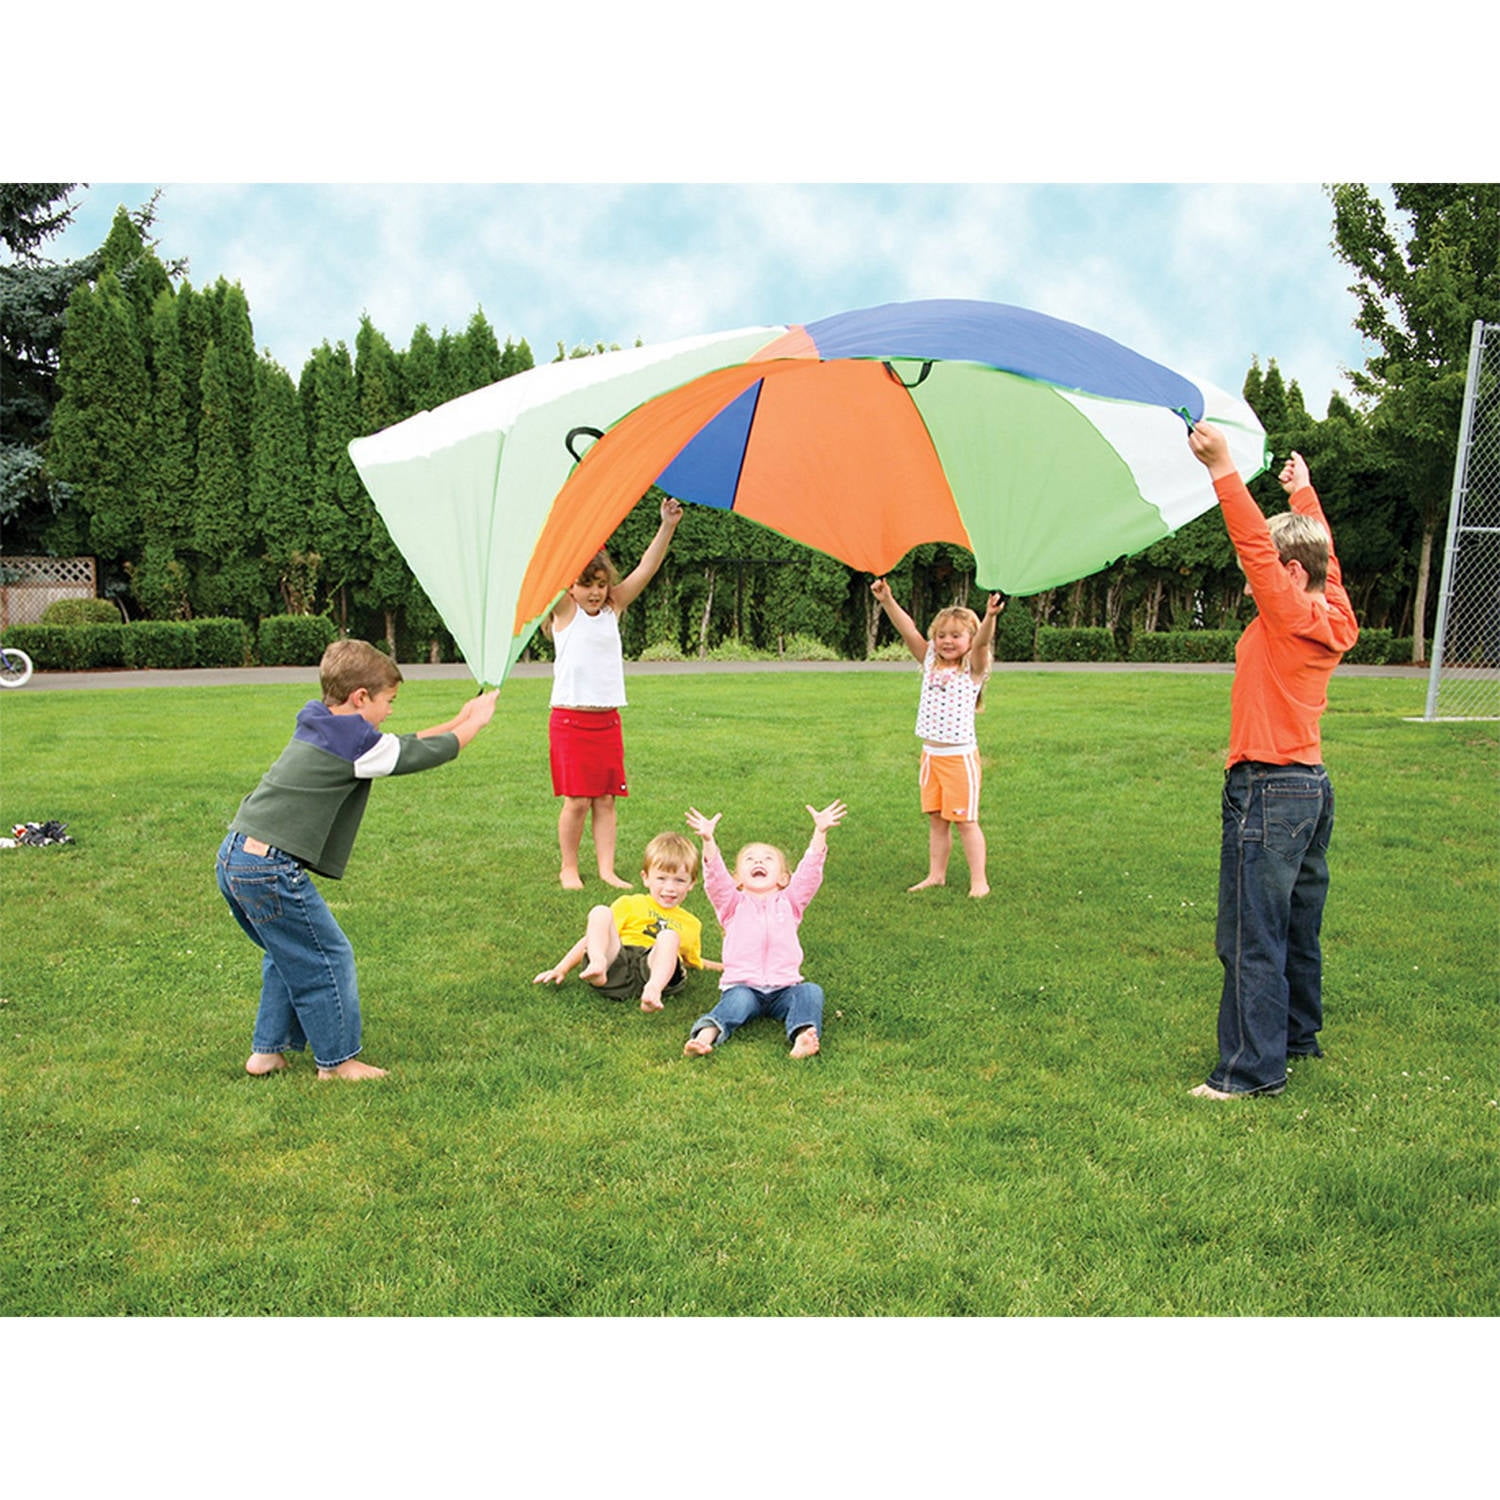 assorted colors from Little Folks Toysmith Giant Parachute Toy 